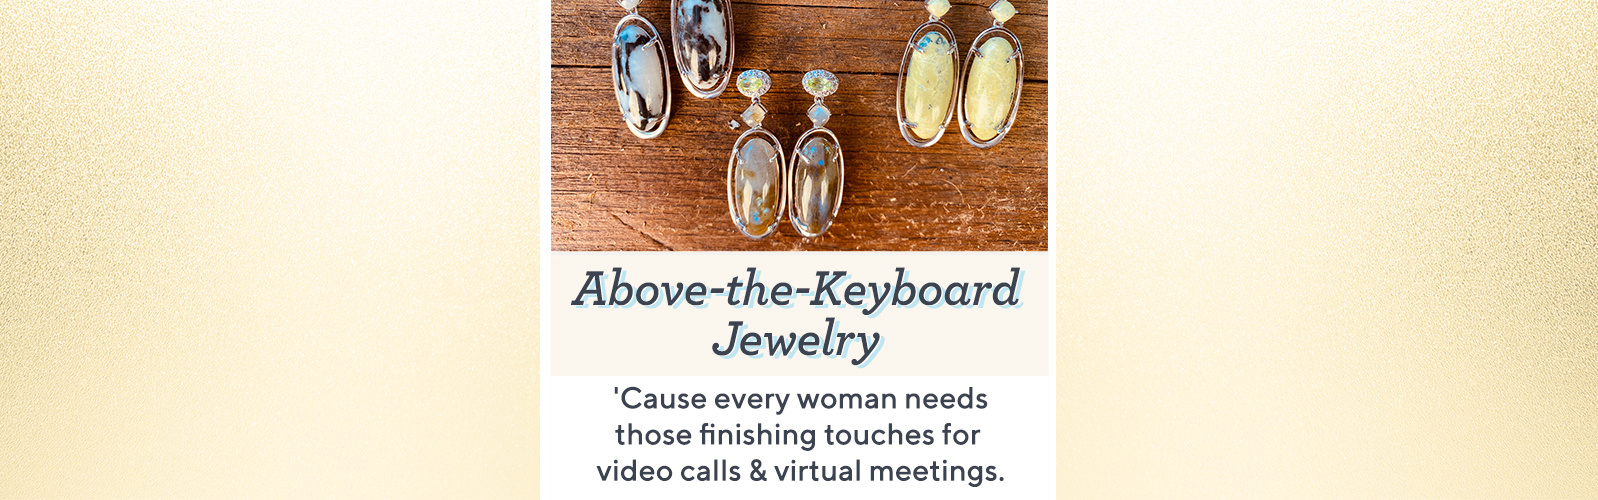 Above-the-Keyboard Jewelry  'Cause every woman needs those finishing touches for video calls & virtual meetings.